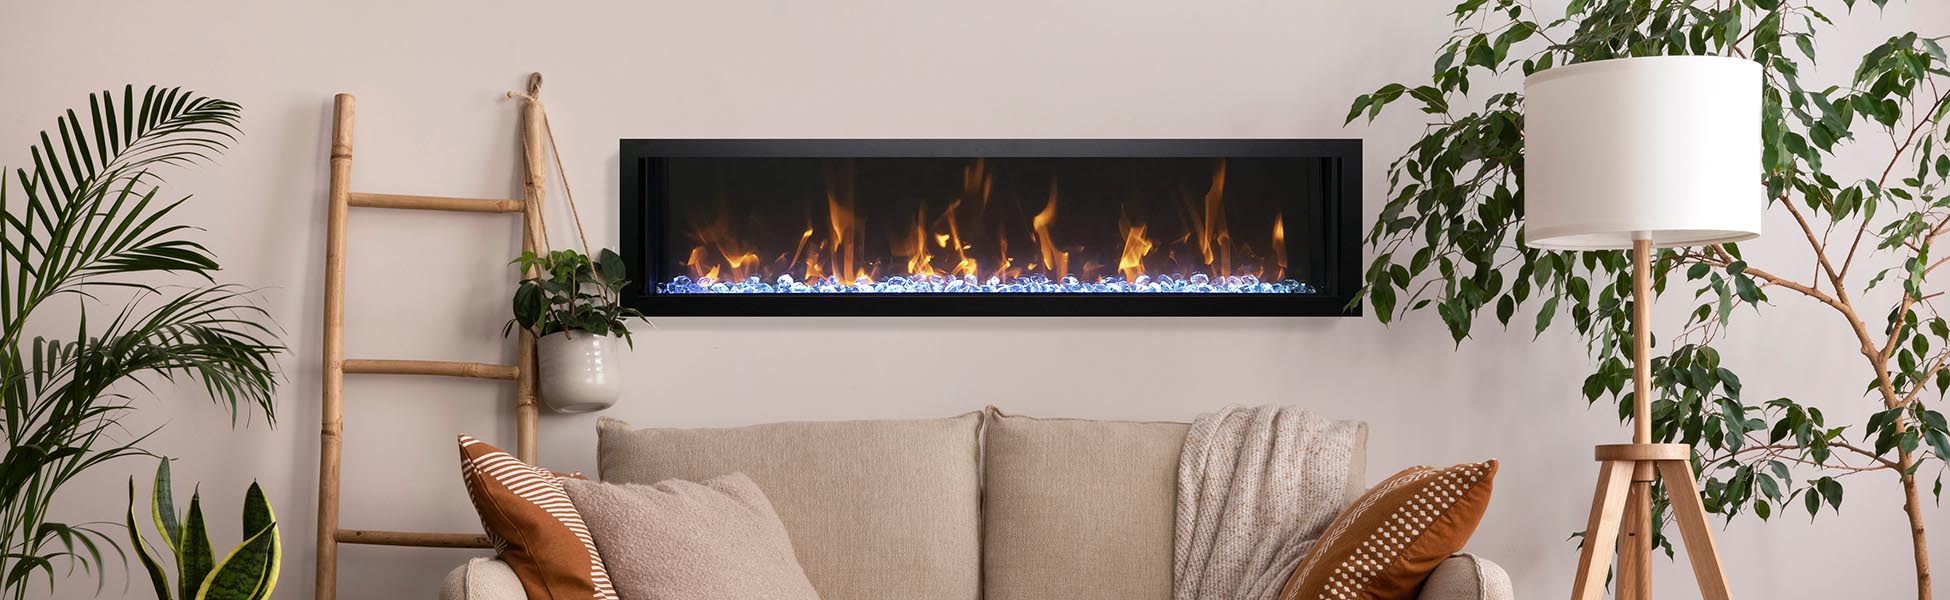 banner-amantii-bi-slim-electric-fireplace-60inch-with-clear-glass-media.jpg